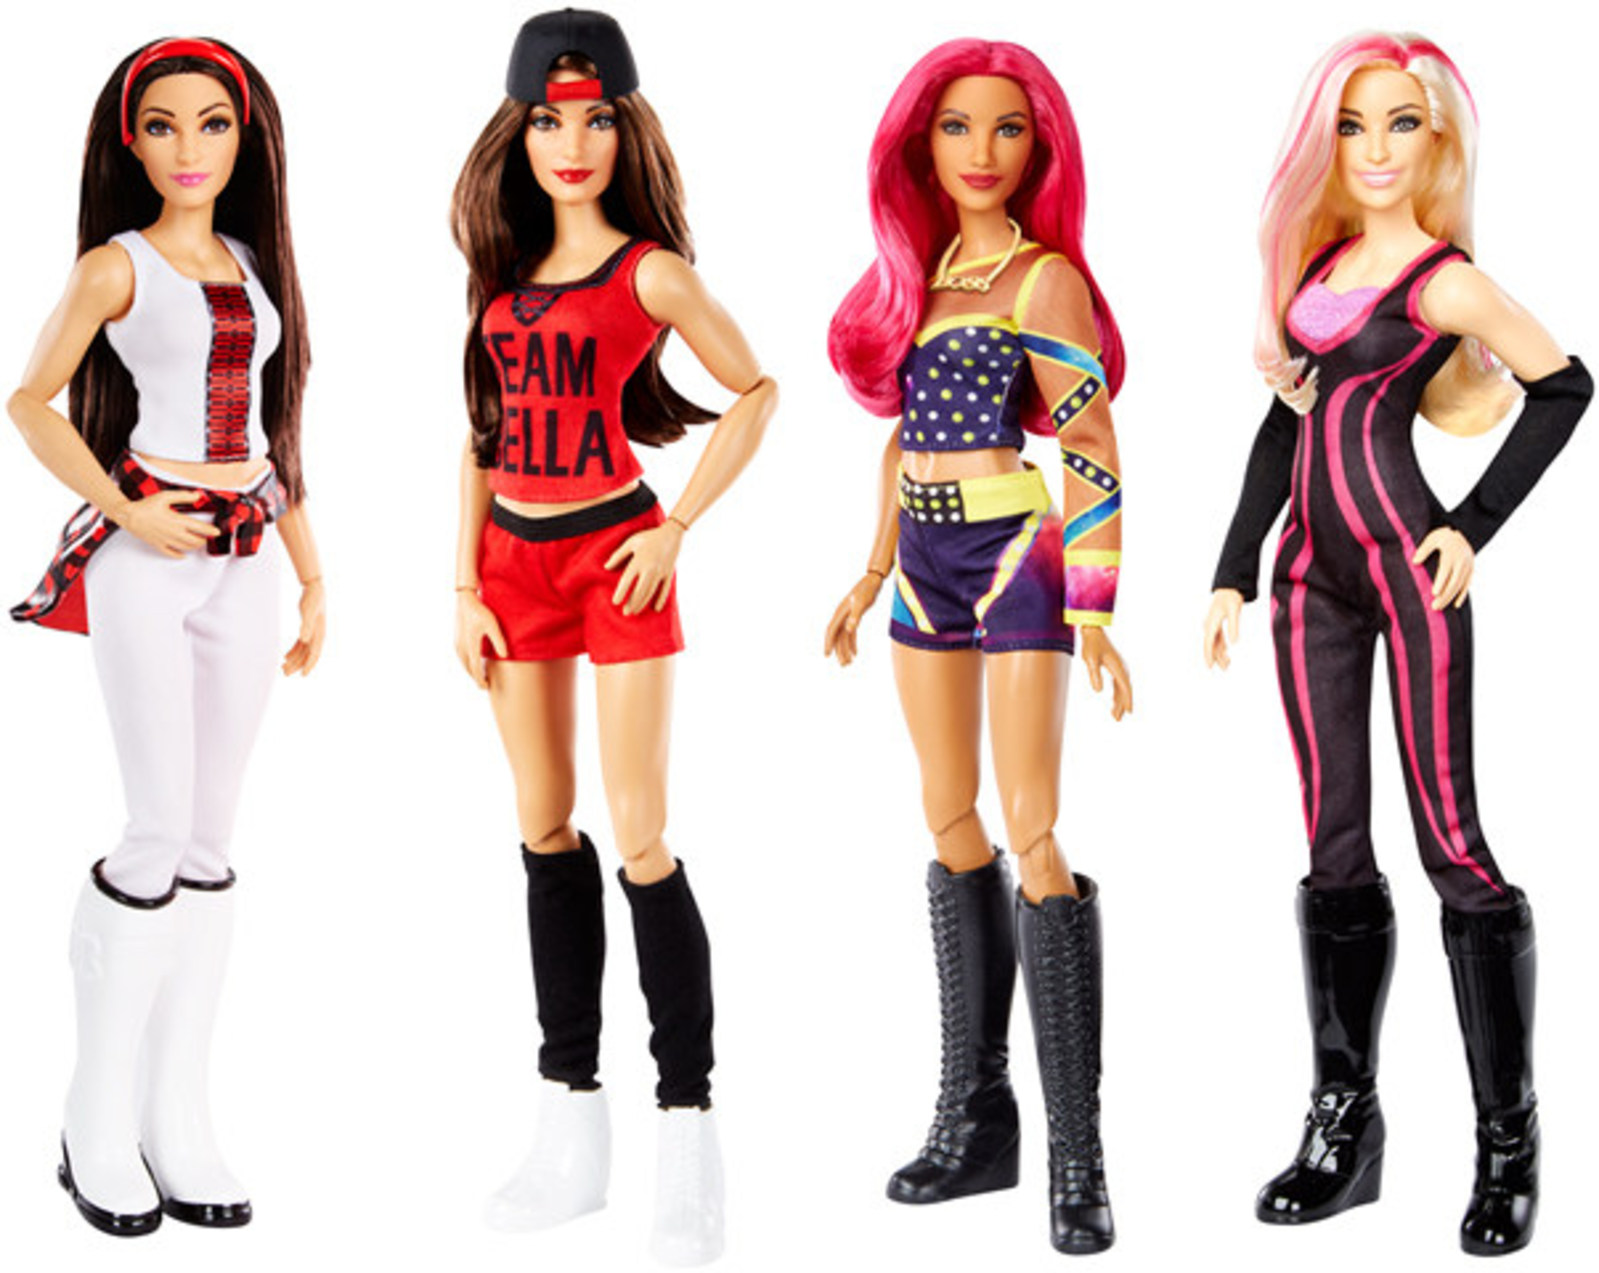 Toys “R” Us Releases WWE Superstar Dolls1599 x 1273